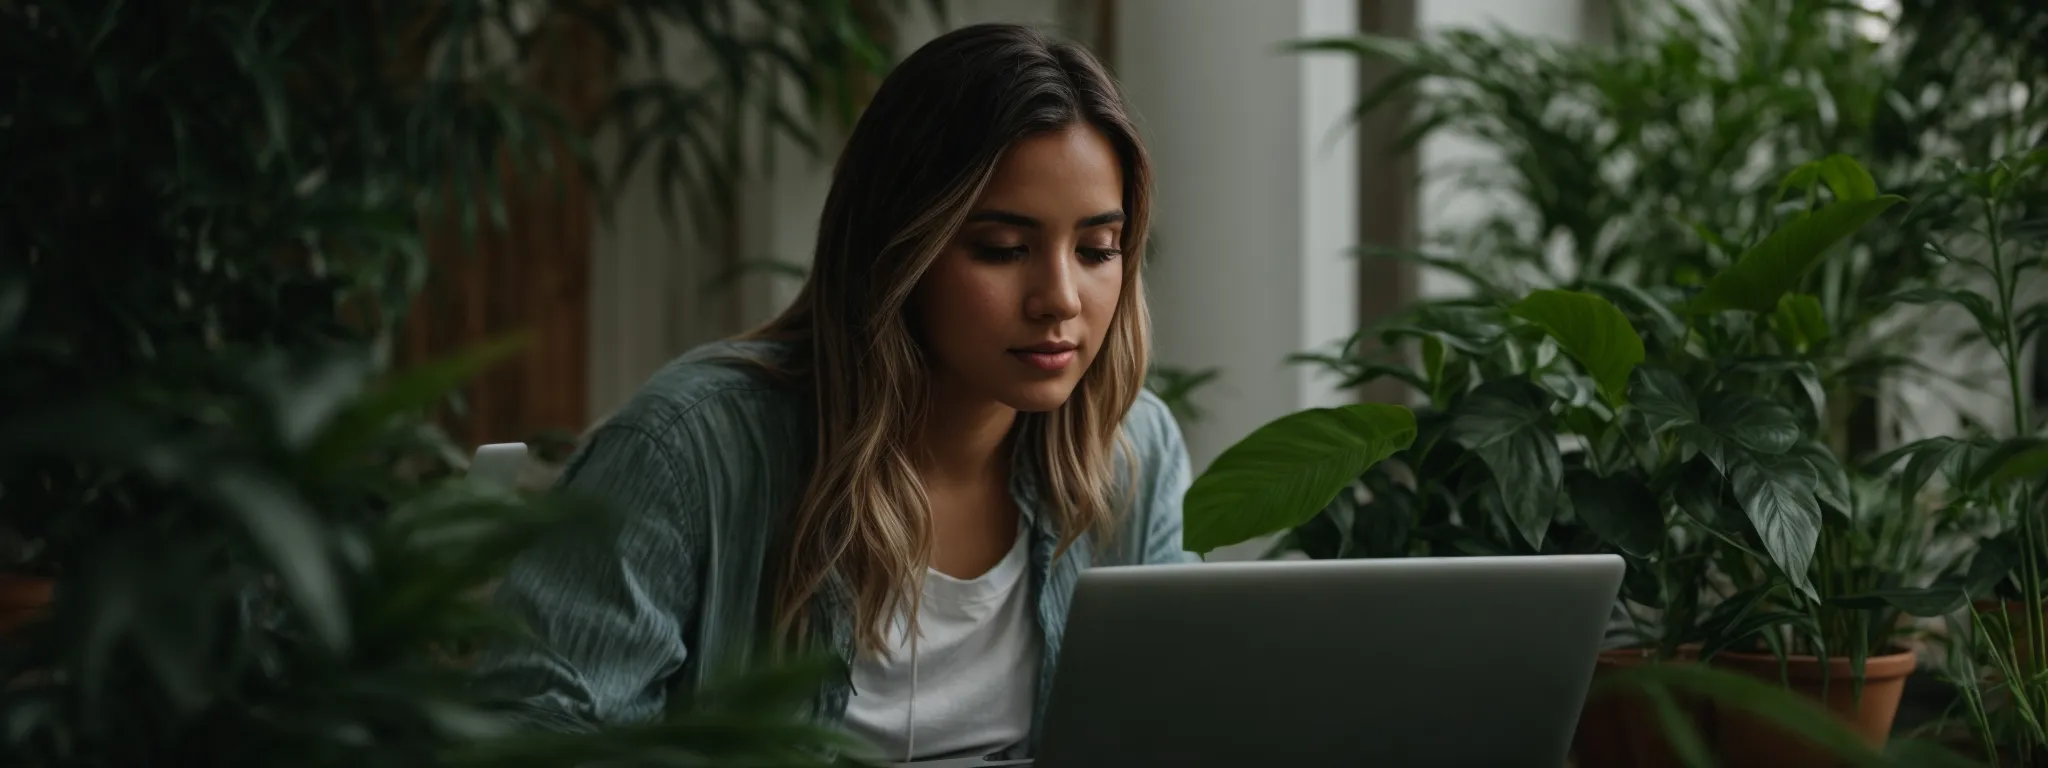 a focused blogger carefully composes a new post on their laptop surrounded by serene plants, encapsulating the art of seo-friendly content creation.